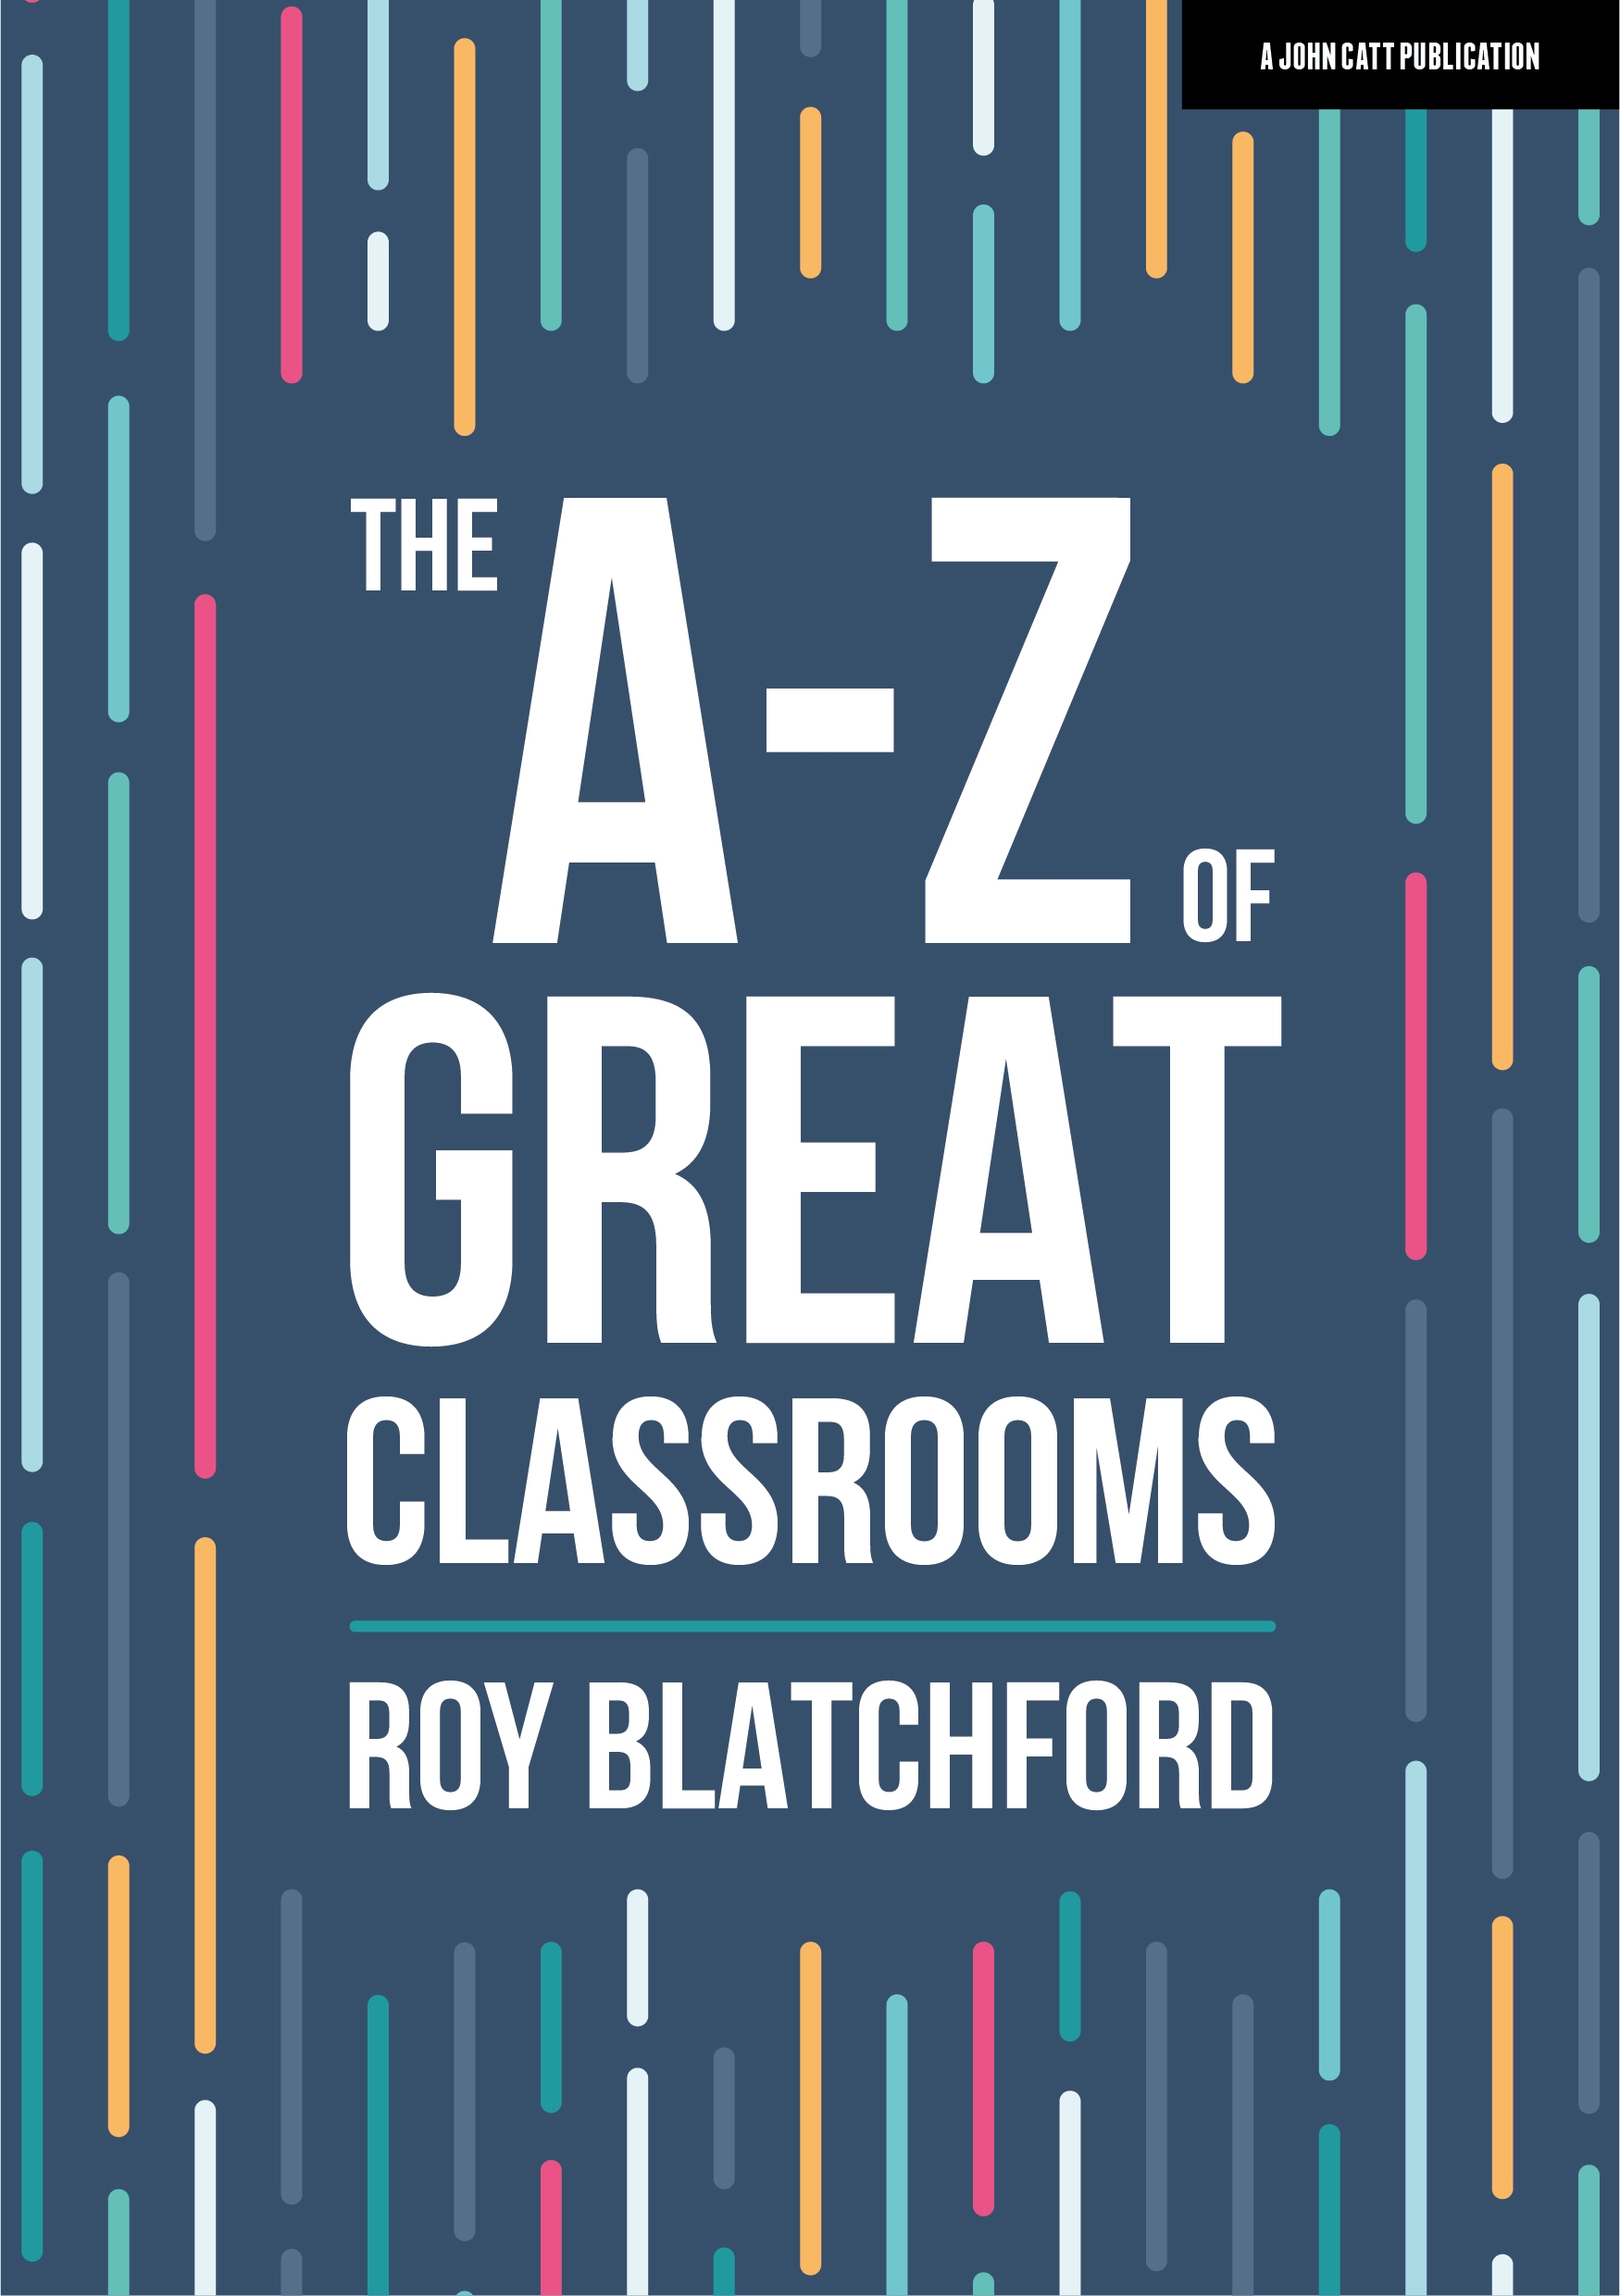 Featured image for “The A-Z of Great Classrooms”